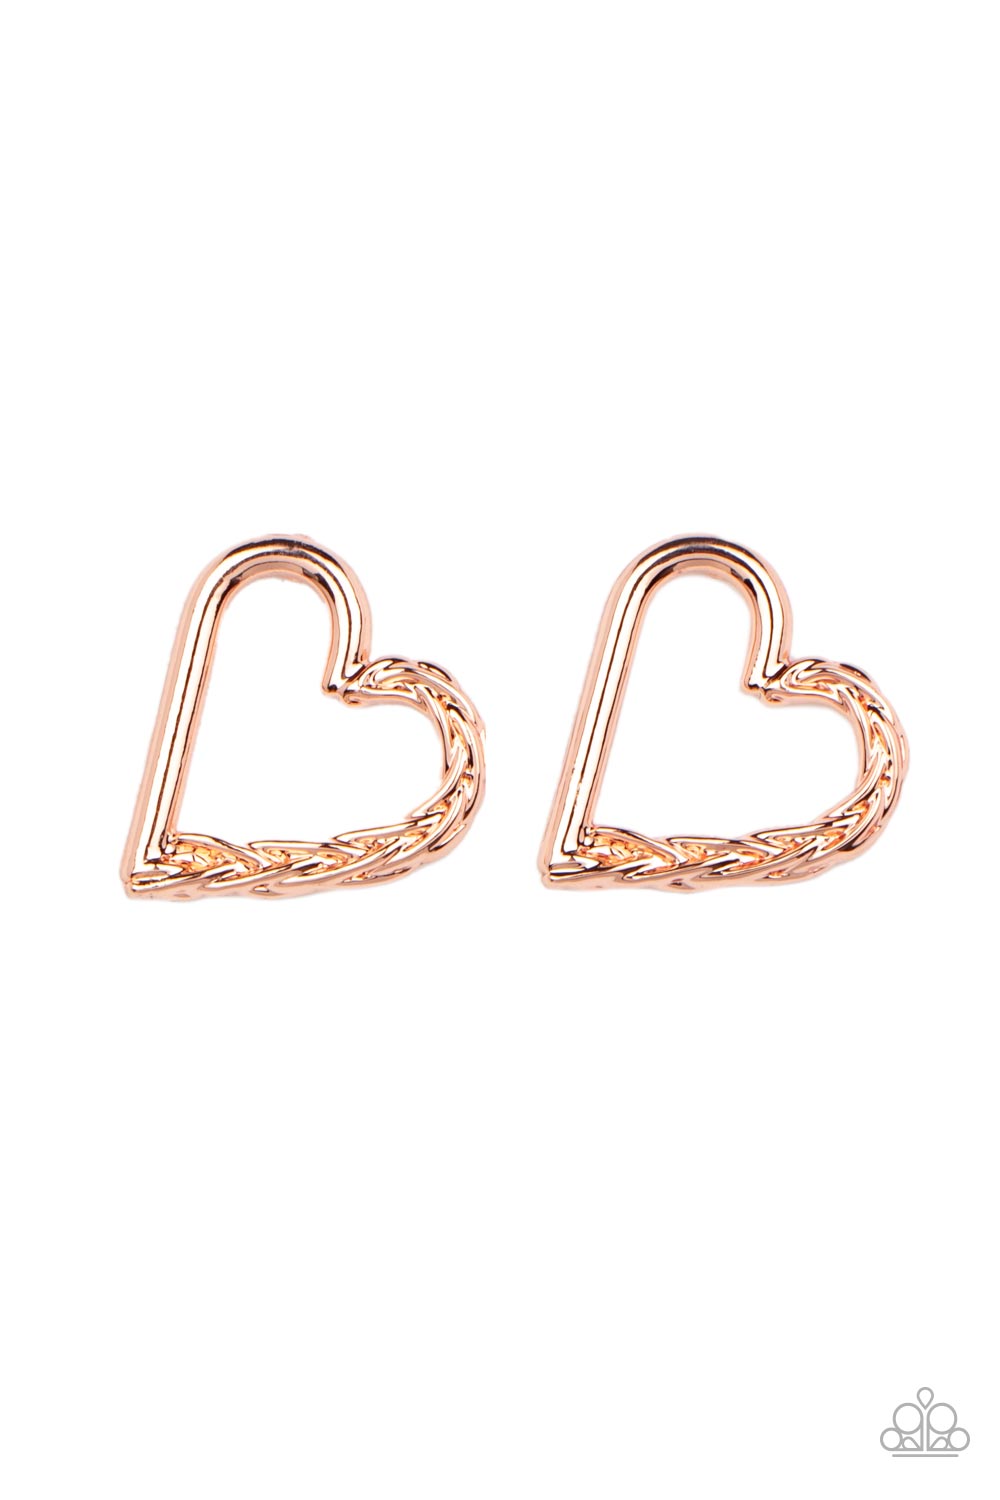 Paparazzi Cupid, Who? Copper Post Earrings - P5PO-CPSH-042XX